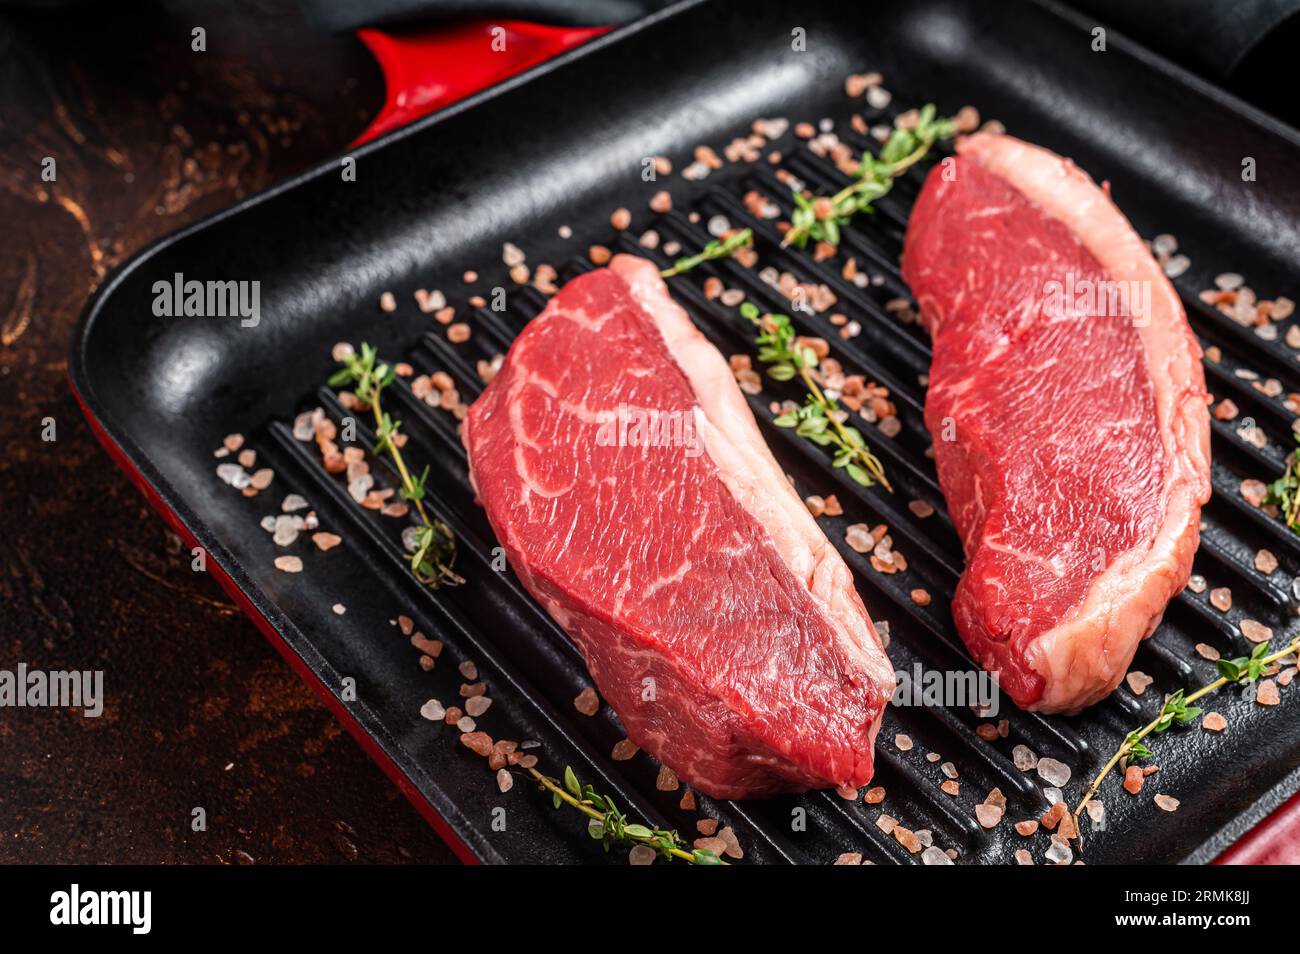 Raw Cap Rump steak, marbled beef meat on a grill skillet. Dark background. Top view. Stock Photo